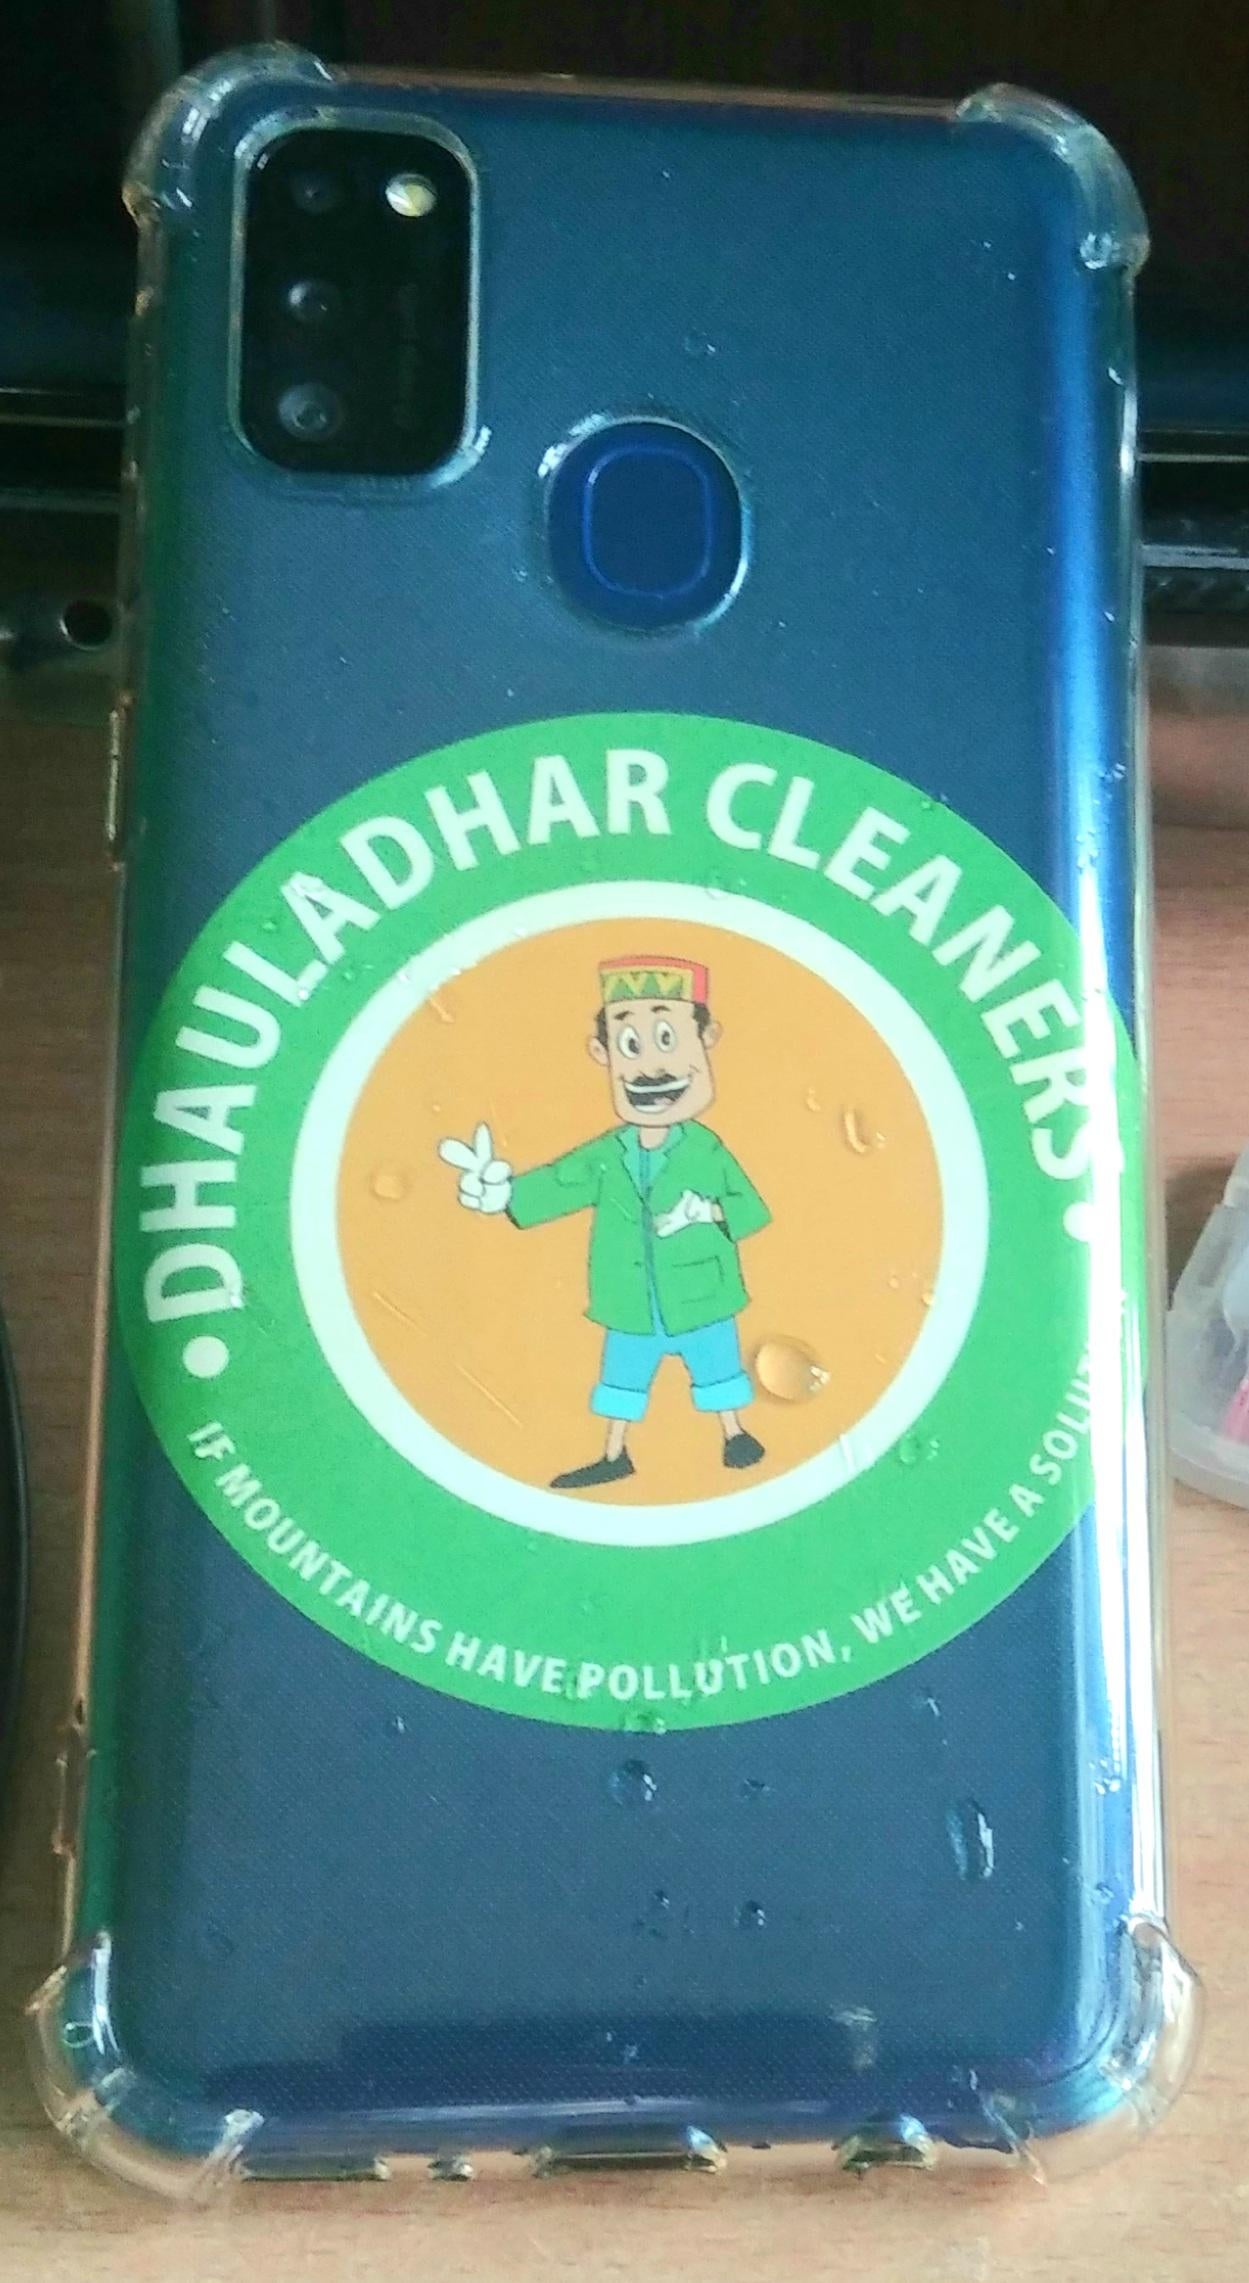 Dhauladhar Cleaners Sticker for the Smartphone back